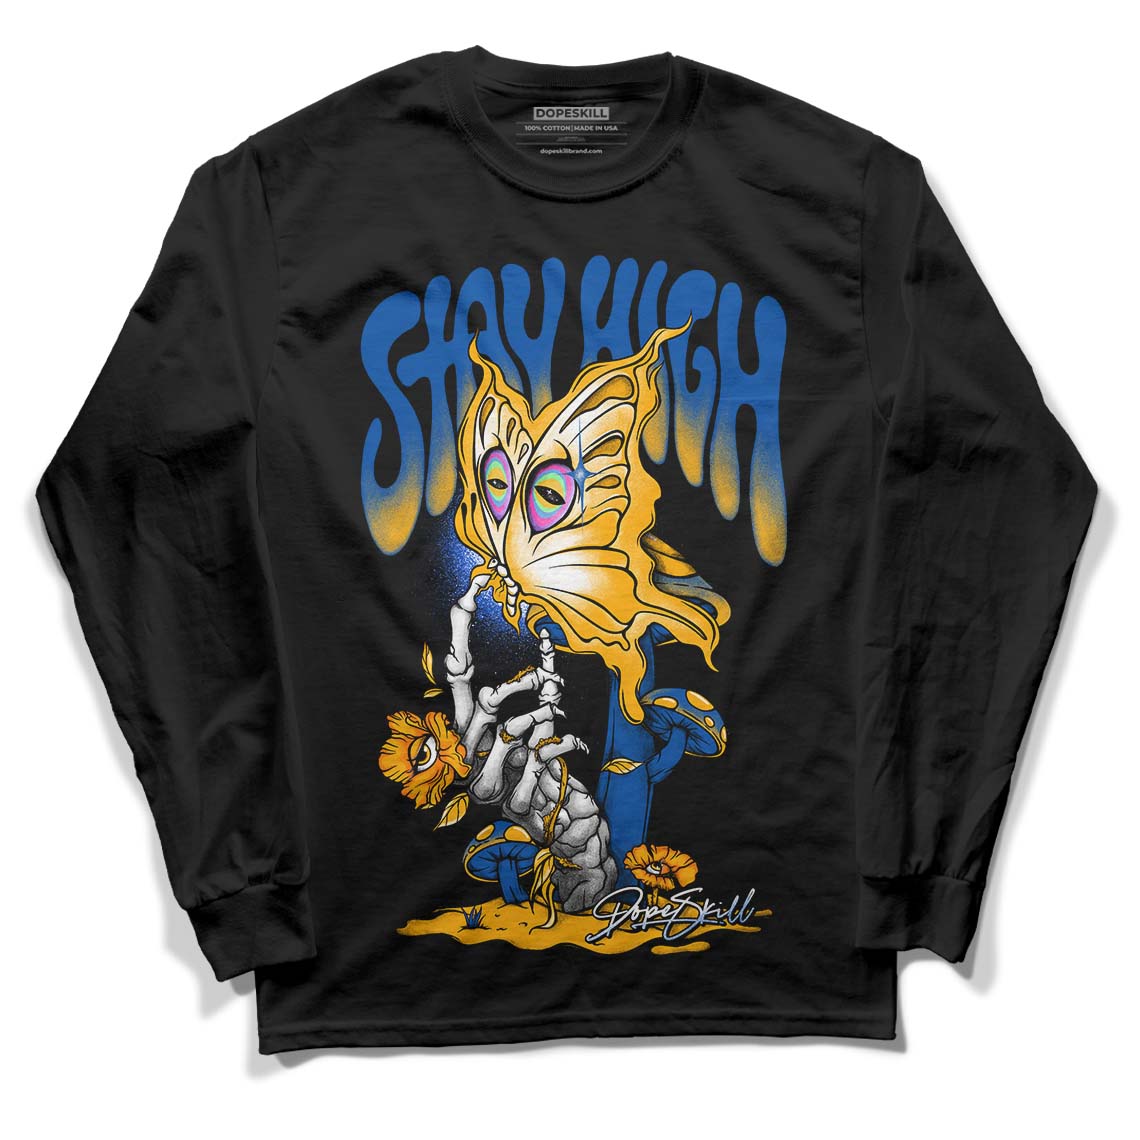 Dunk Blue Jay and University Gold DopeSkill Long Sleeve T-Shirt Stay High Graphic Streetwear - Black